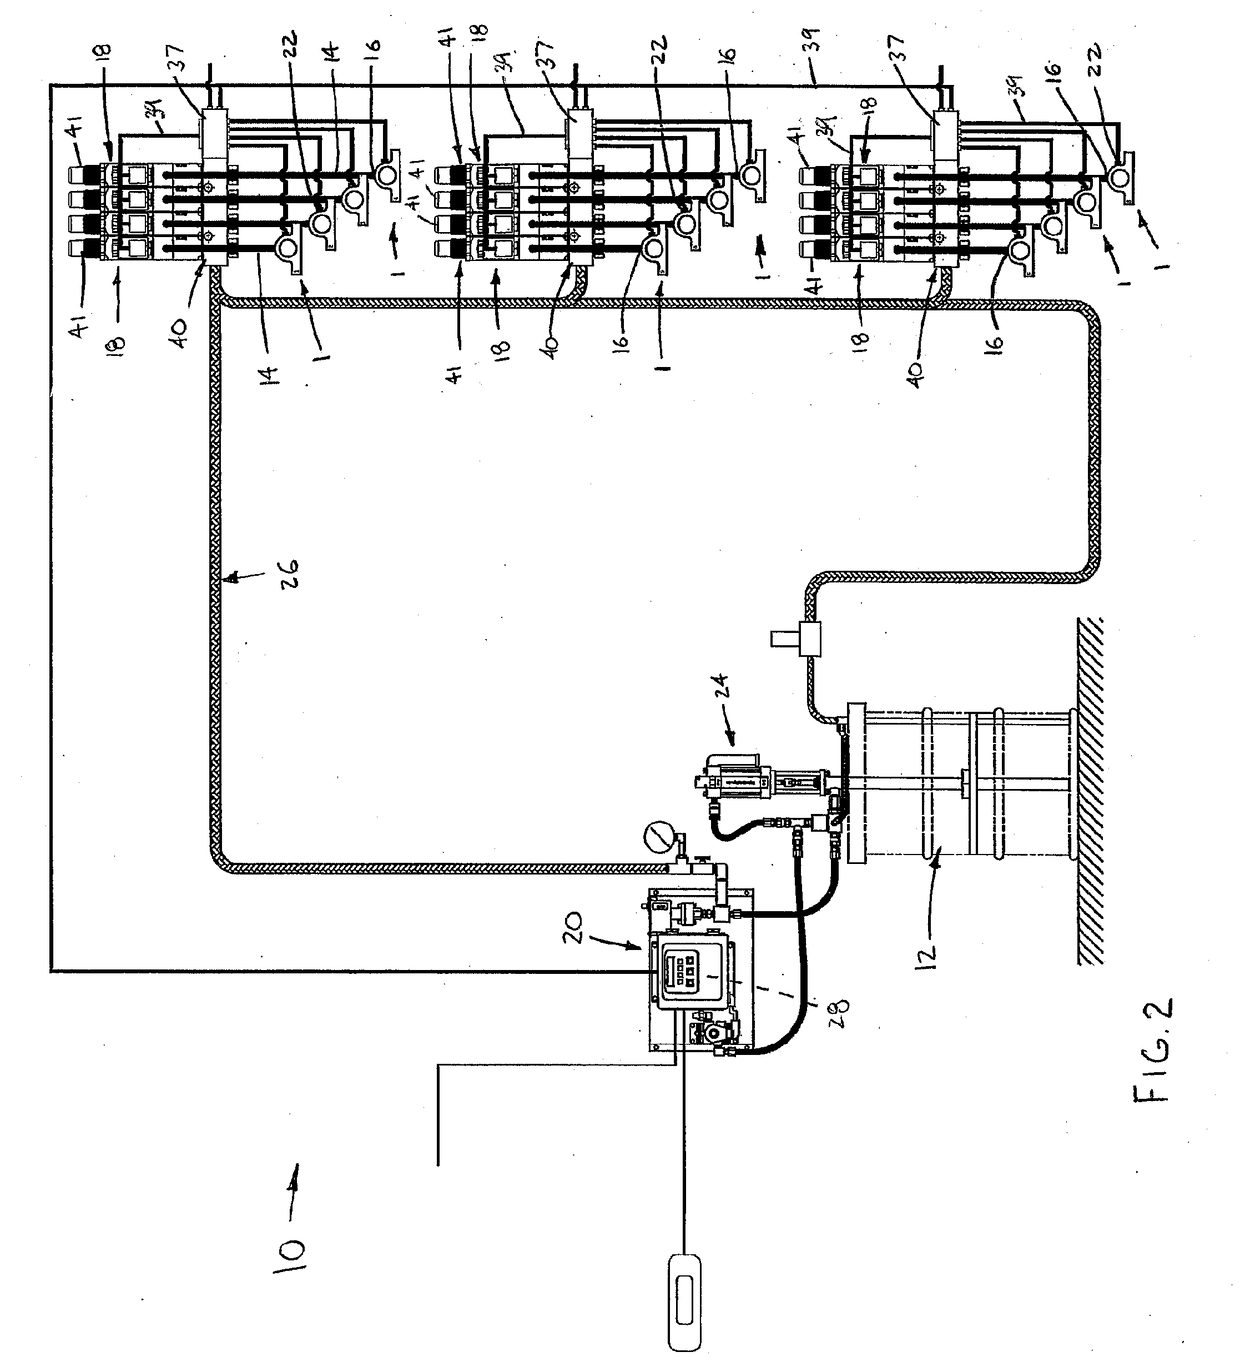 Lubrication system with lubricant condition monitoring